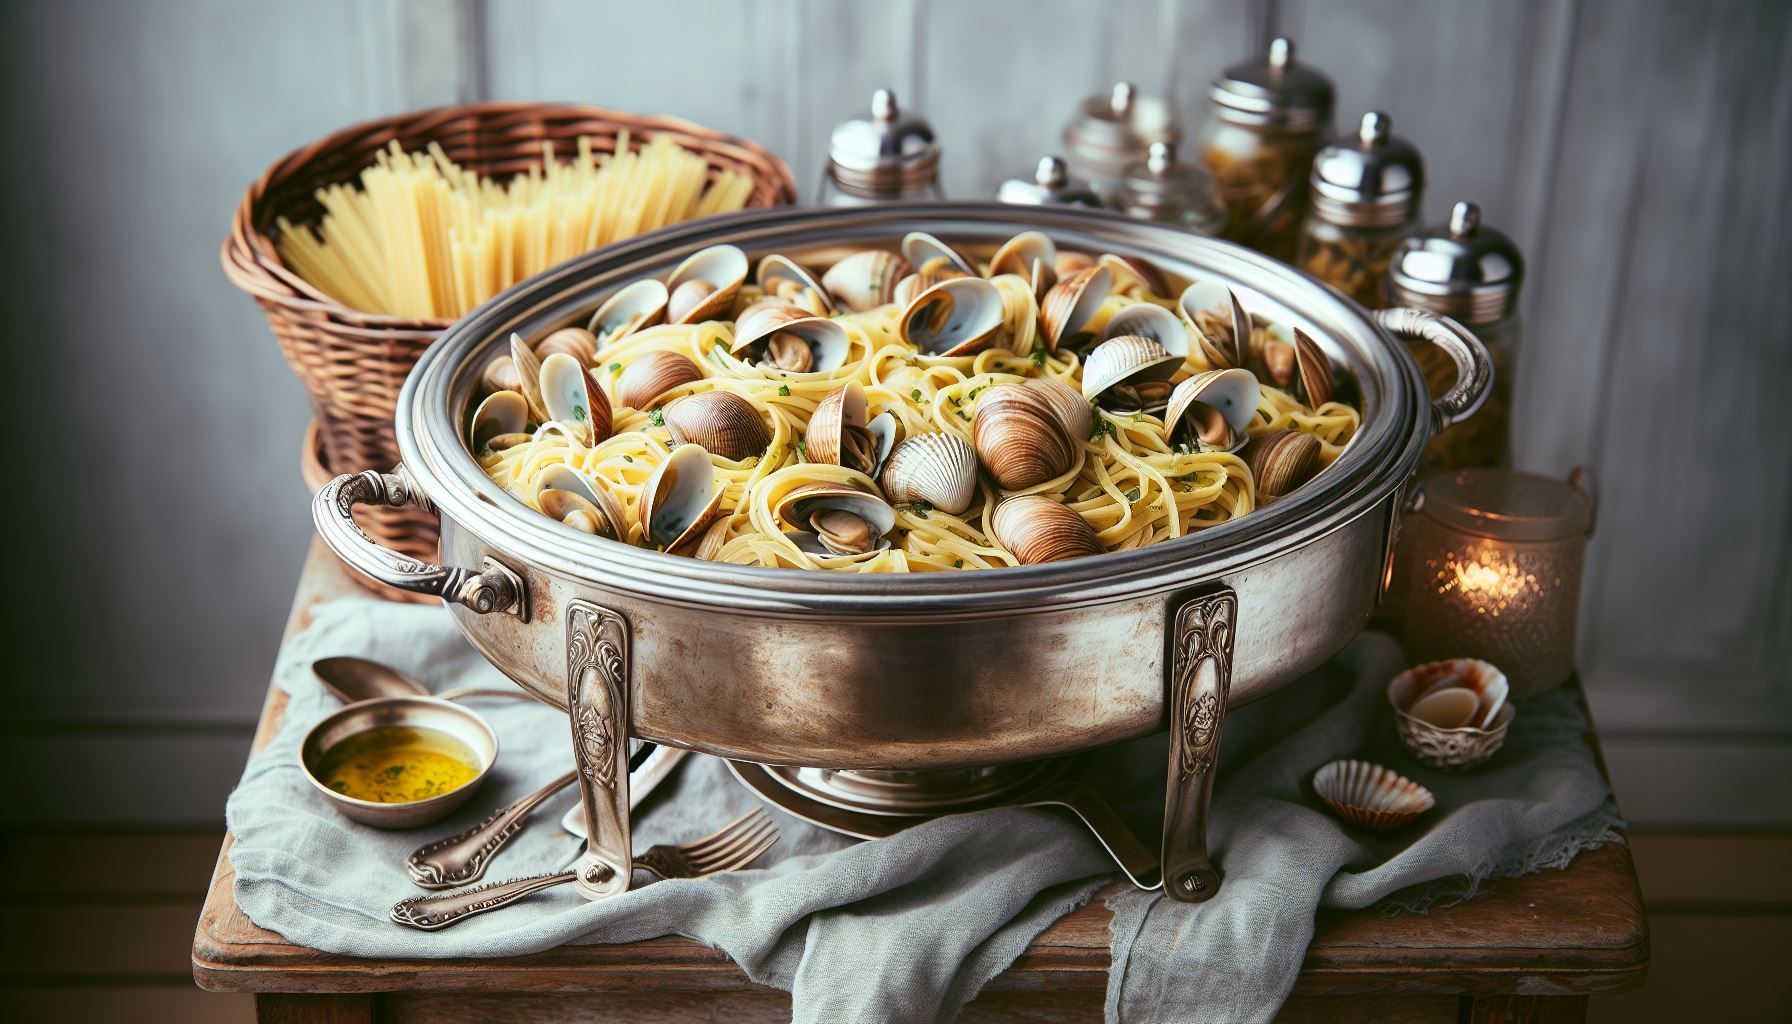 A pot of spaghetti and clams is sitting on a wooden table.